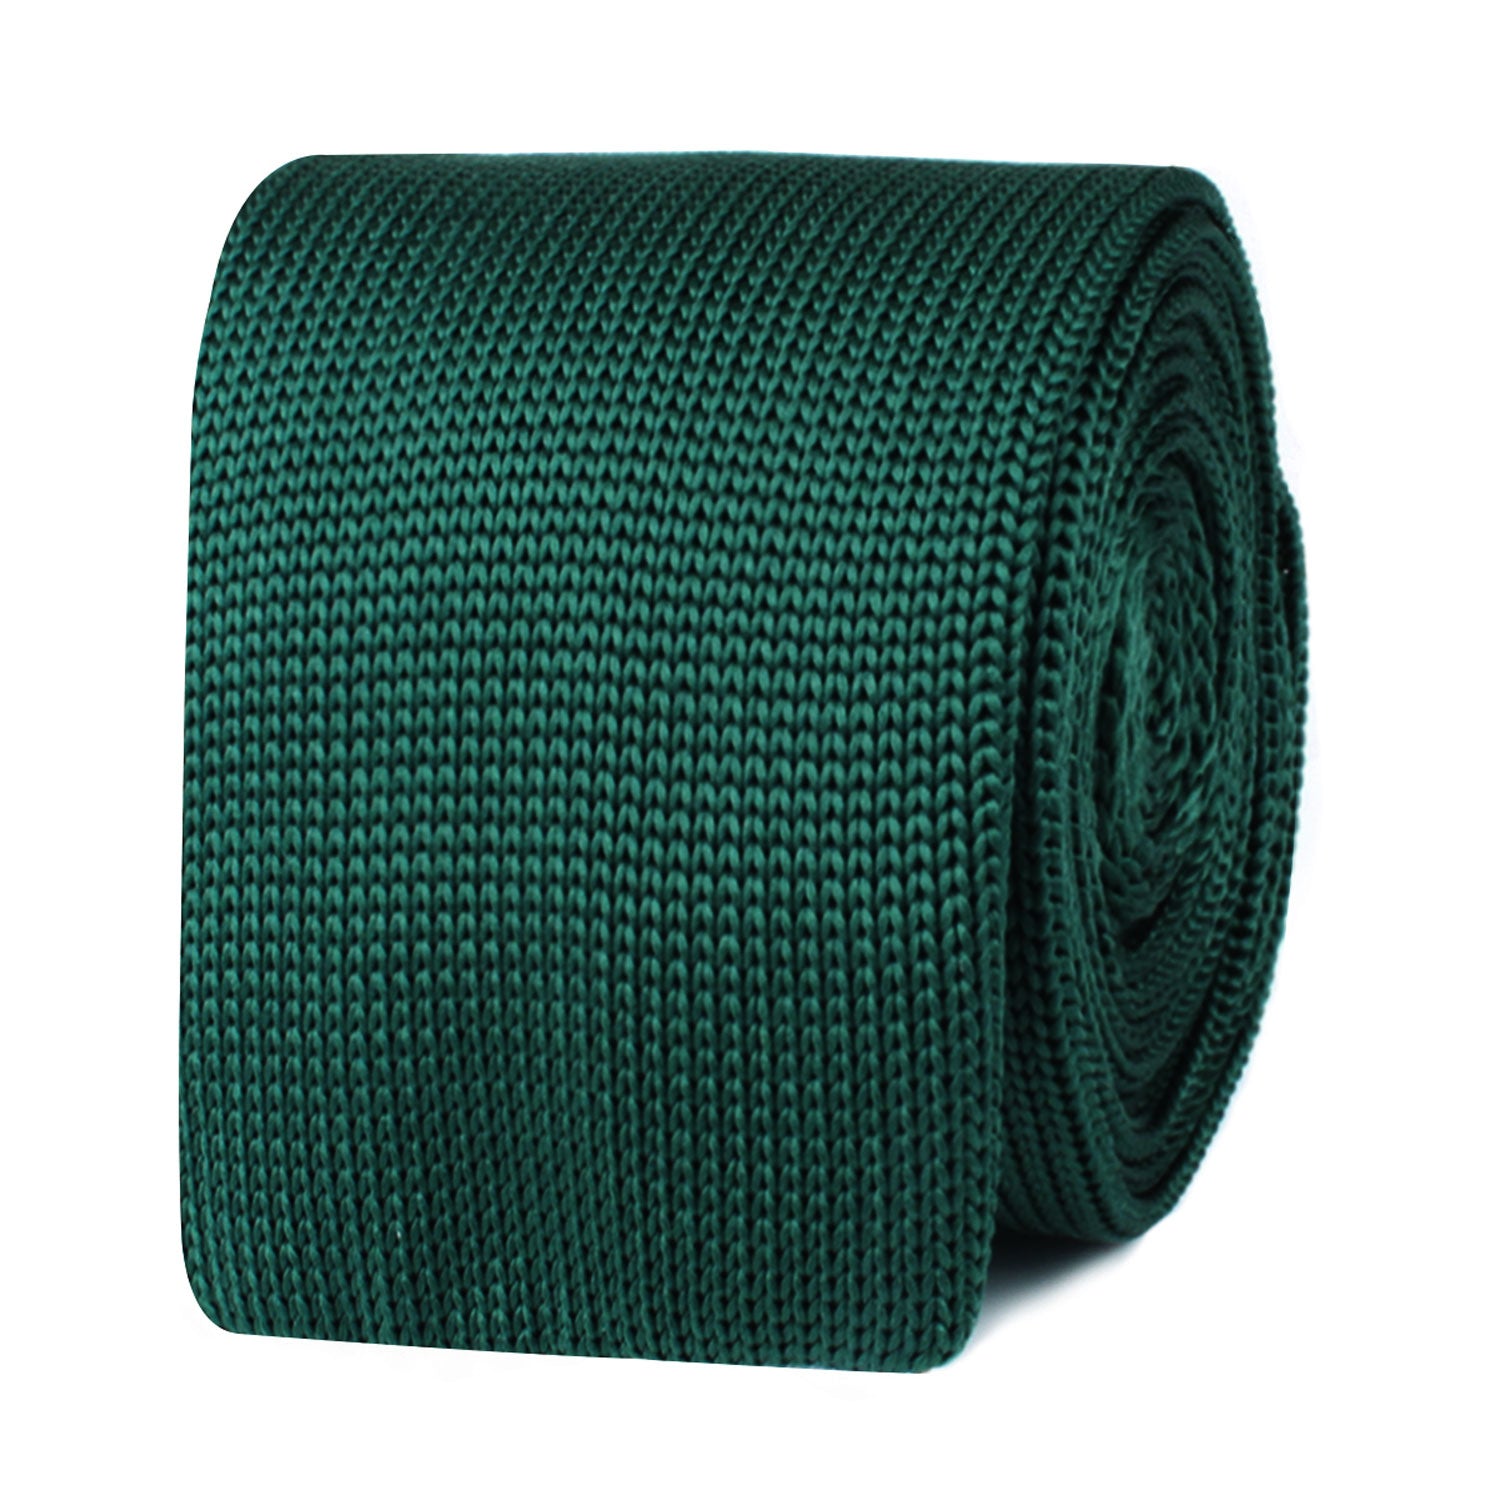 Amadeus Green Knitted Tie